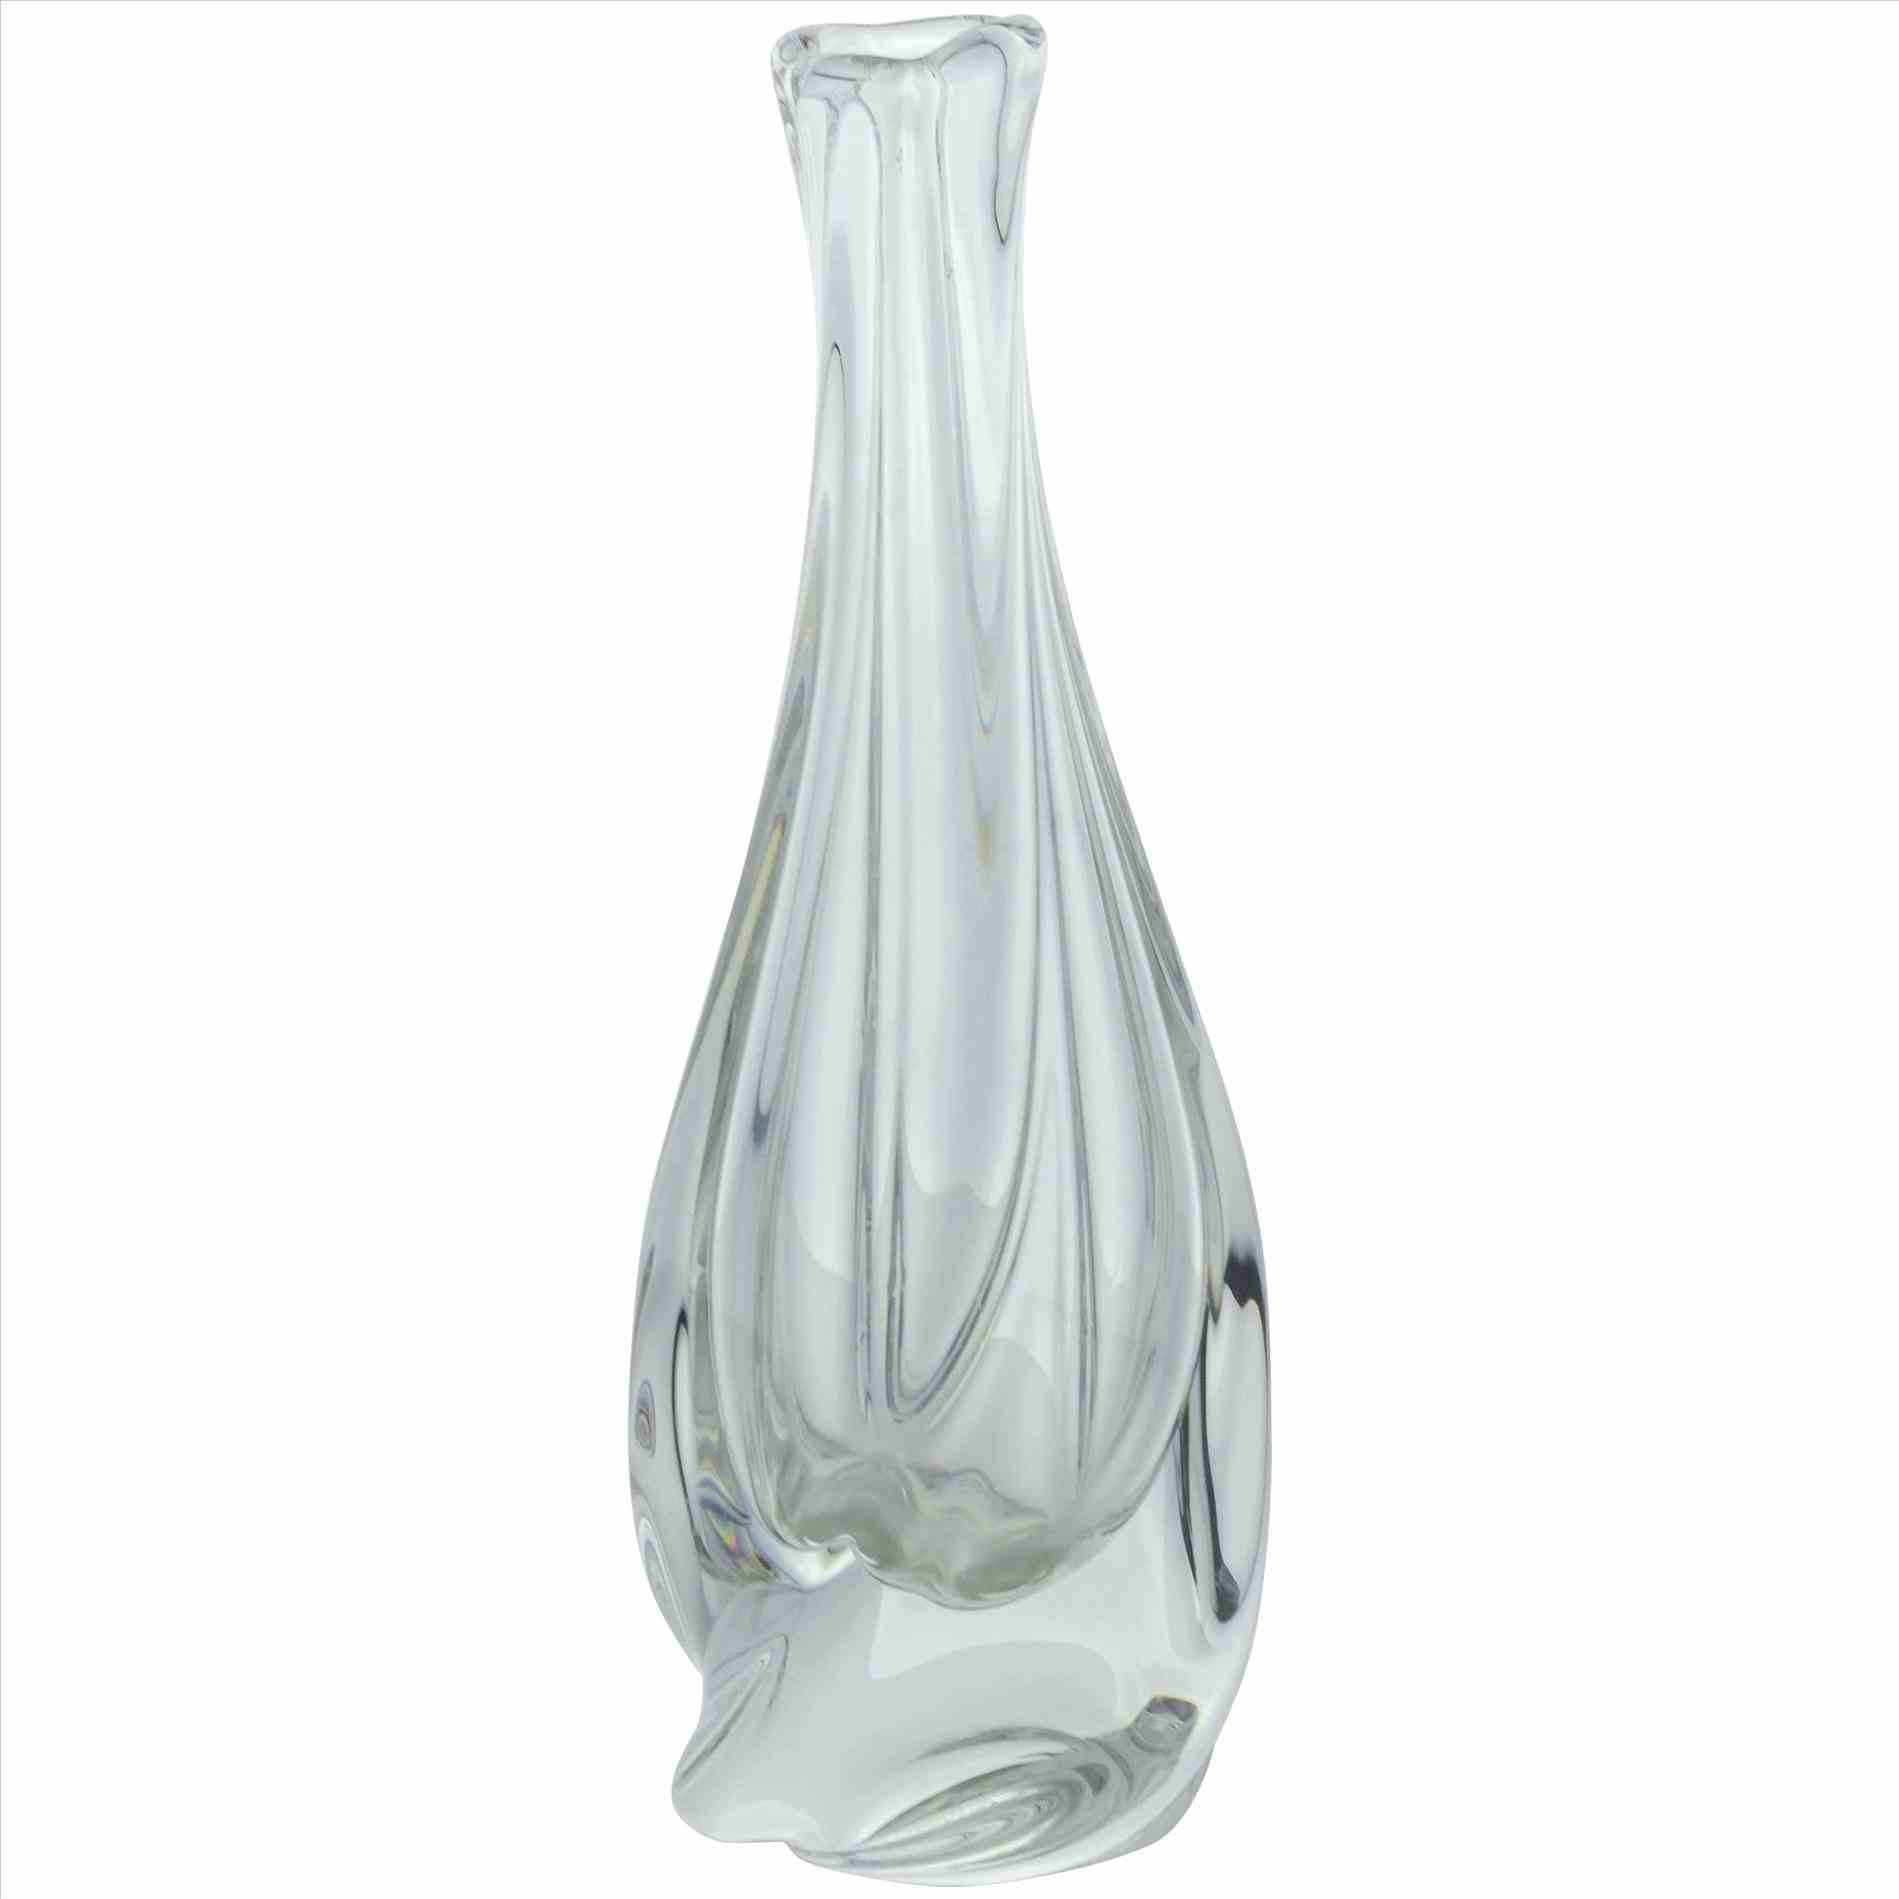 15 Great Plastic Trumpet Vases wholesale 2024 free download plastic trumpet vases wholesale of silver vases wholesale pandoraocharms us in silver vases wholesale for u flowers and supplies